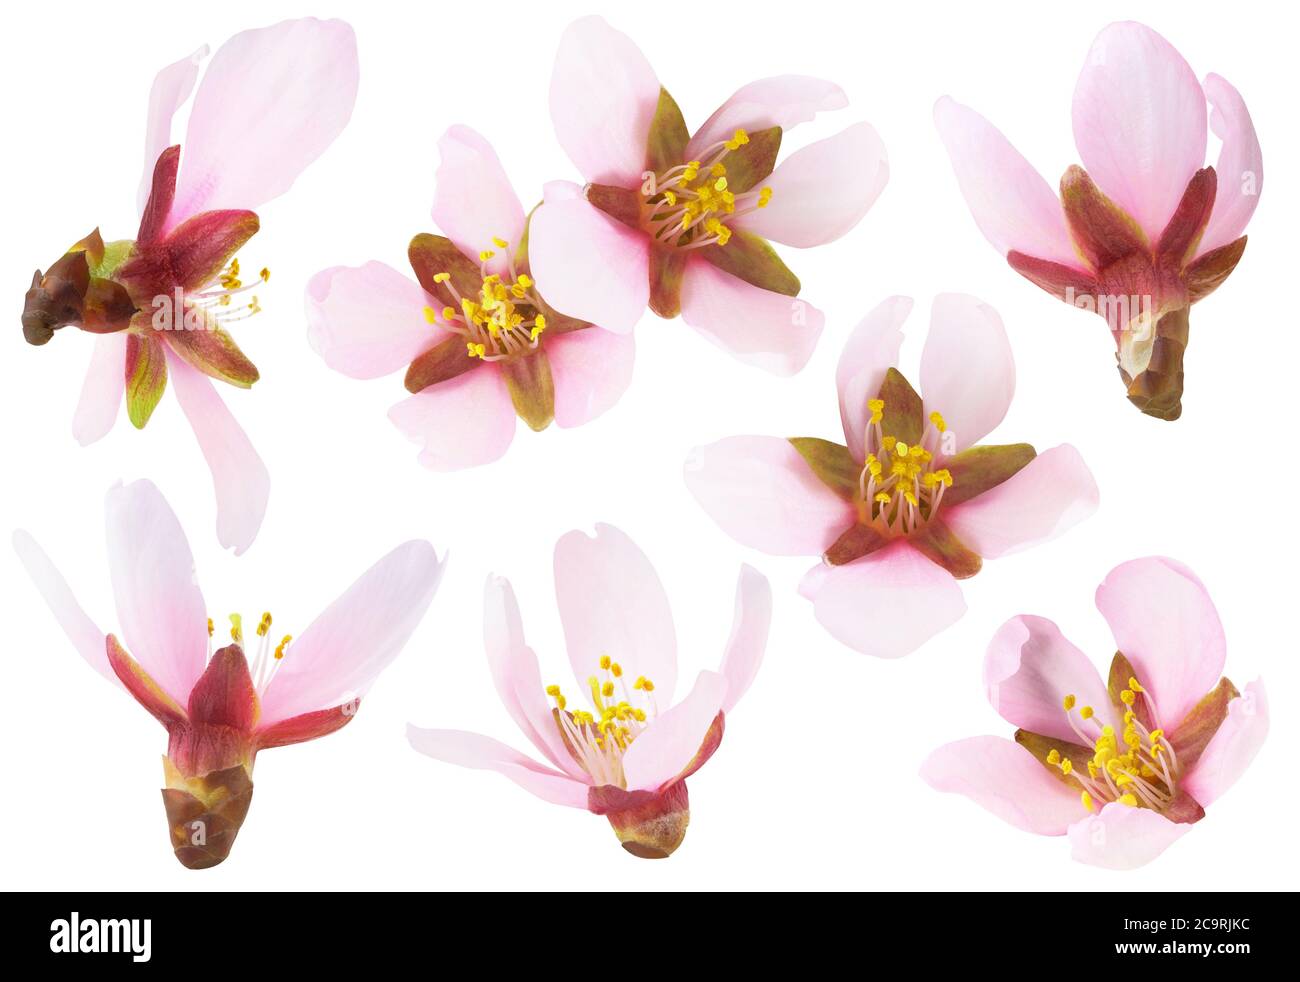 Isolated almond flowers. Collection of pink almond tree blossoms of different shapes isolated on white background Stock Photo